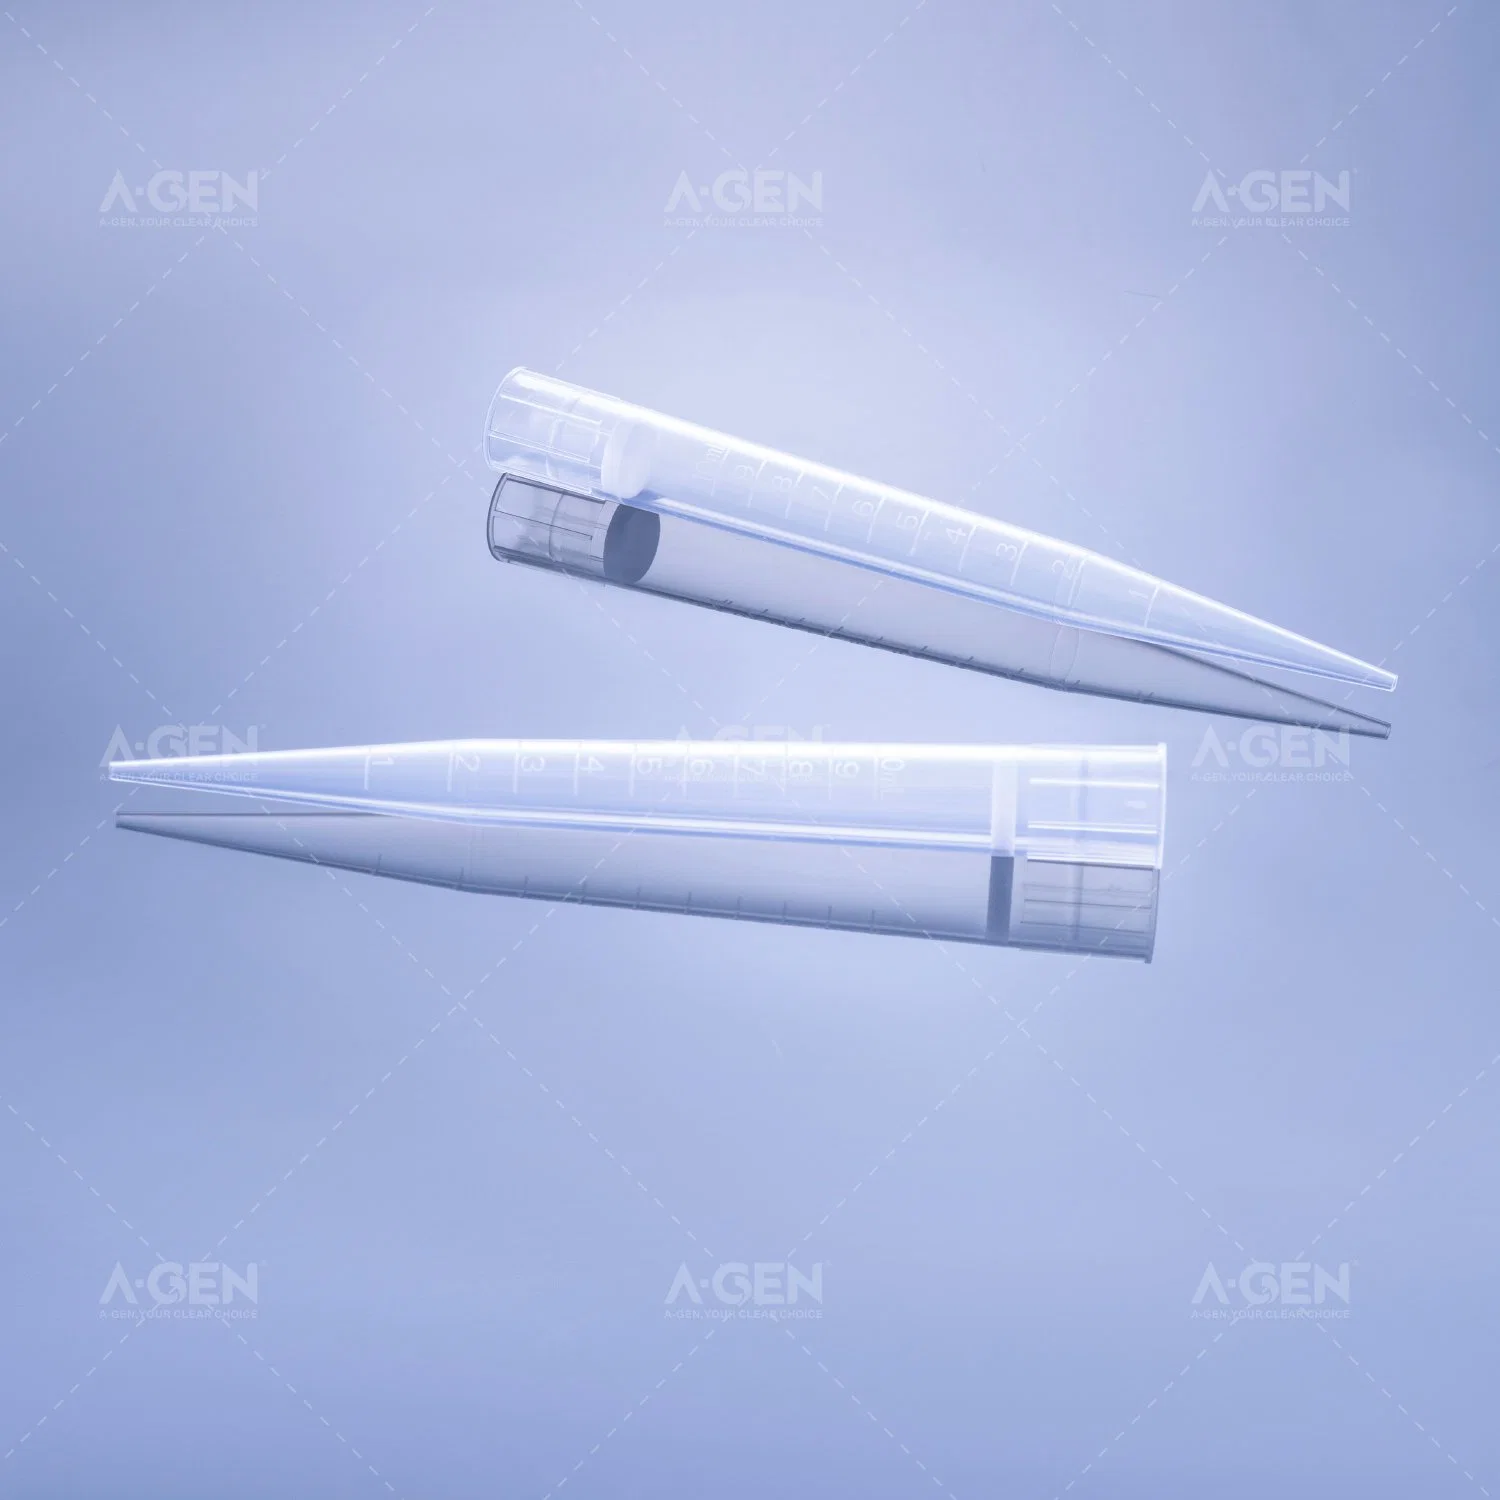 Racked 10ml Filter Pipette Tip Disposable Plastic Pack Rack 10000UL Filter Pipette with Wide Mouth